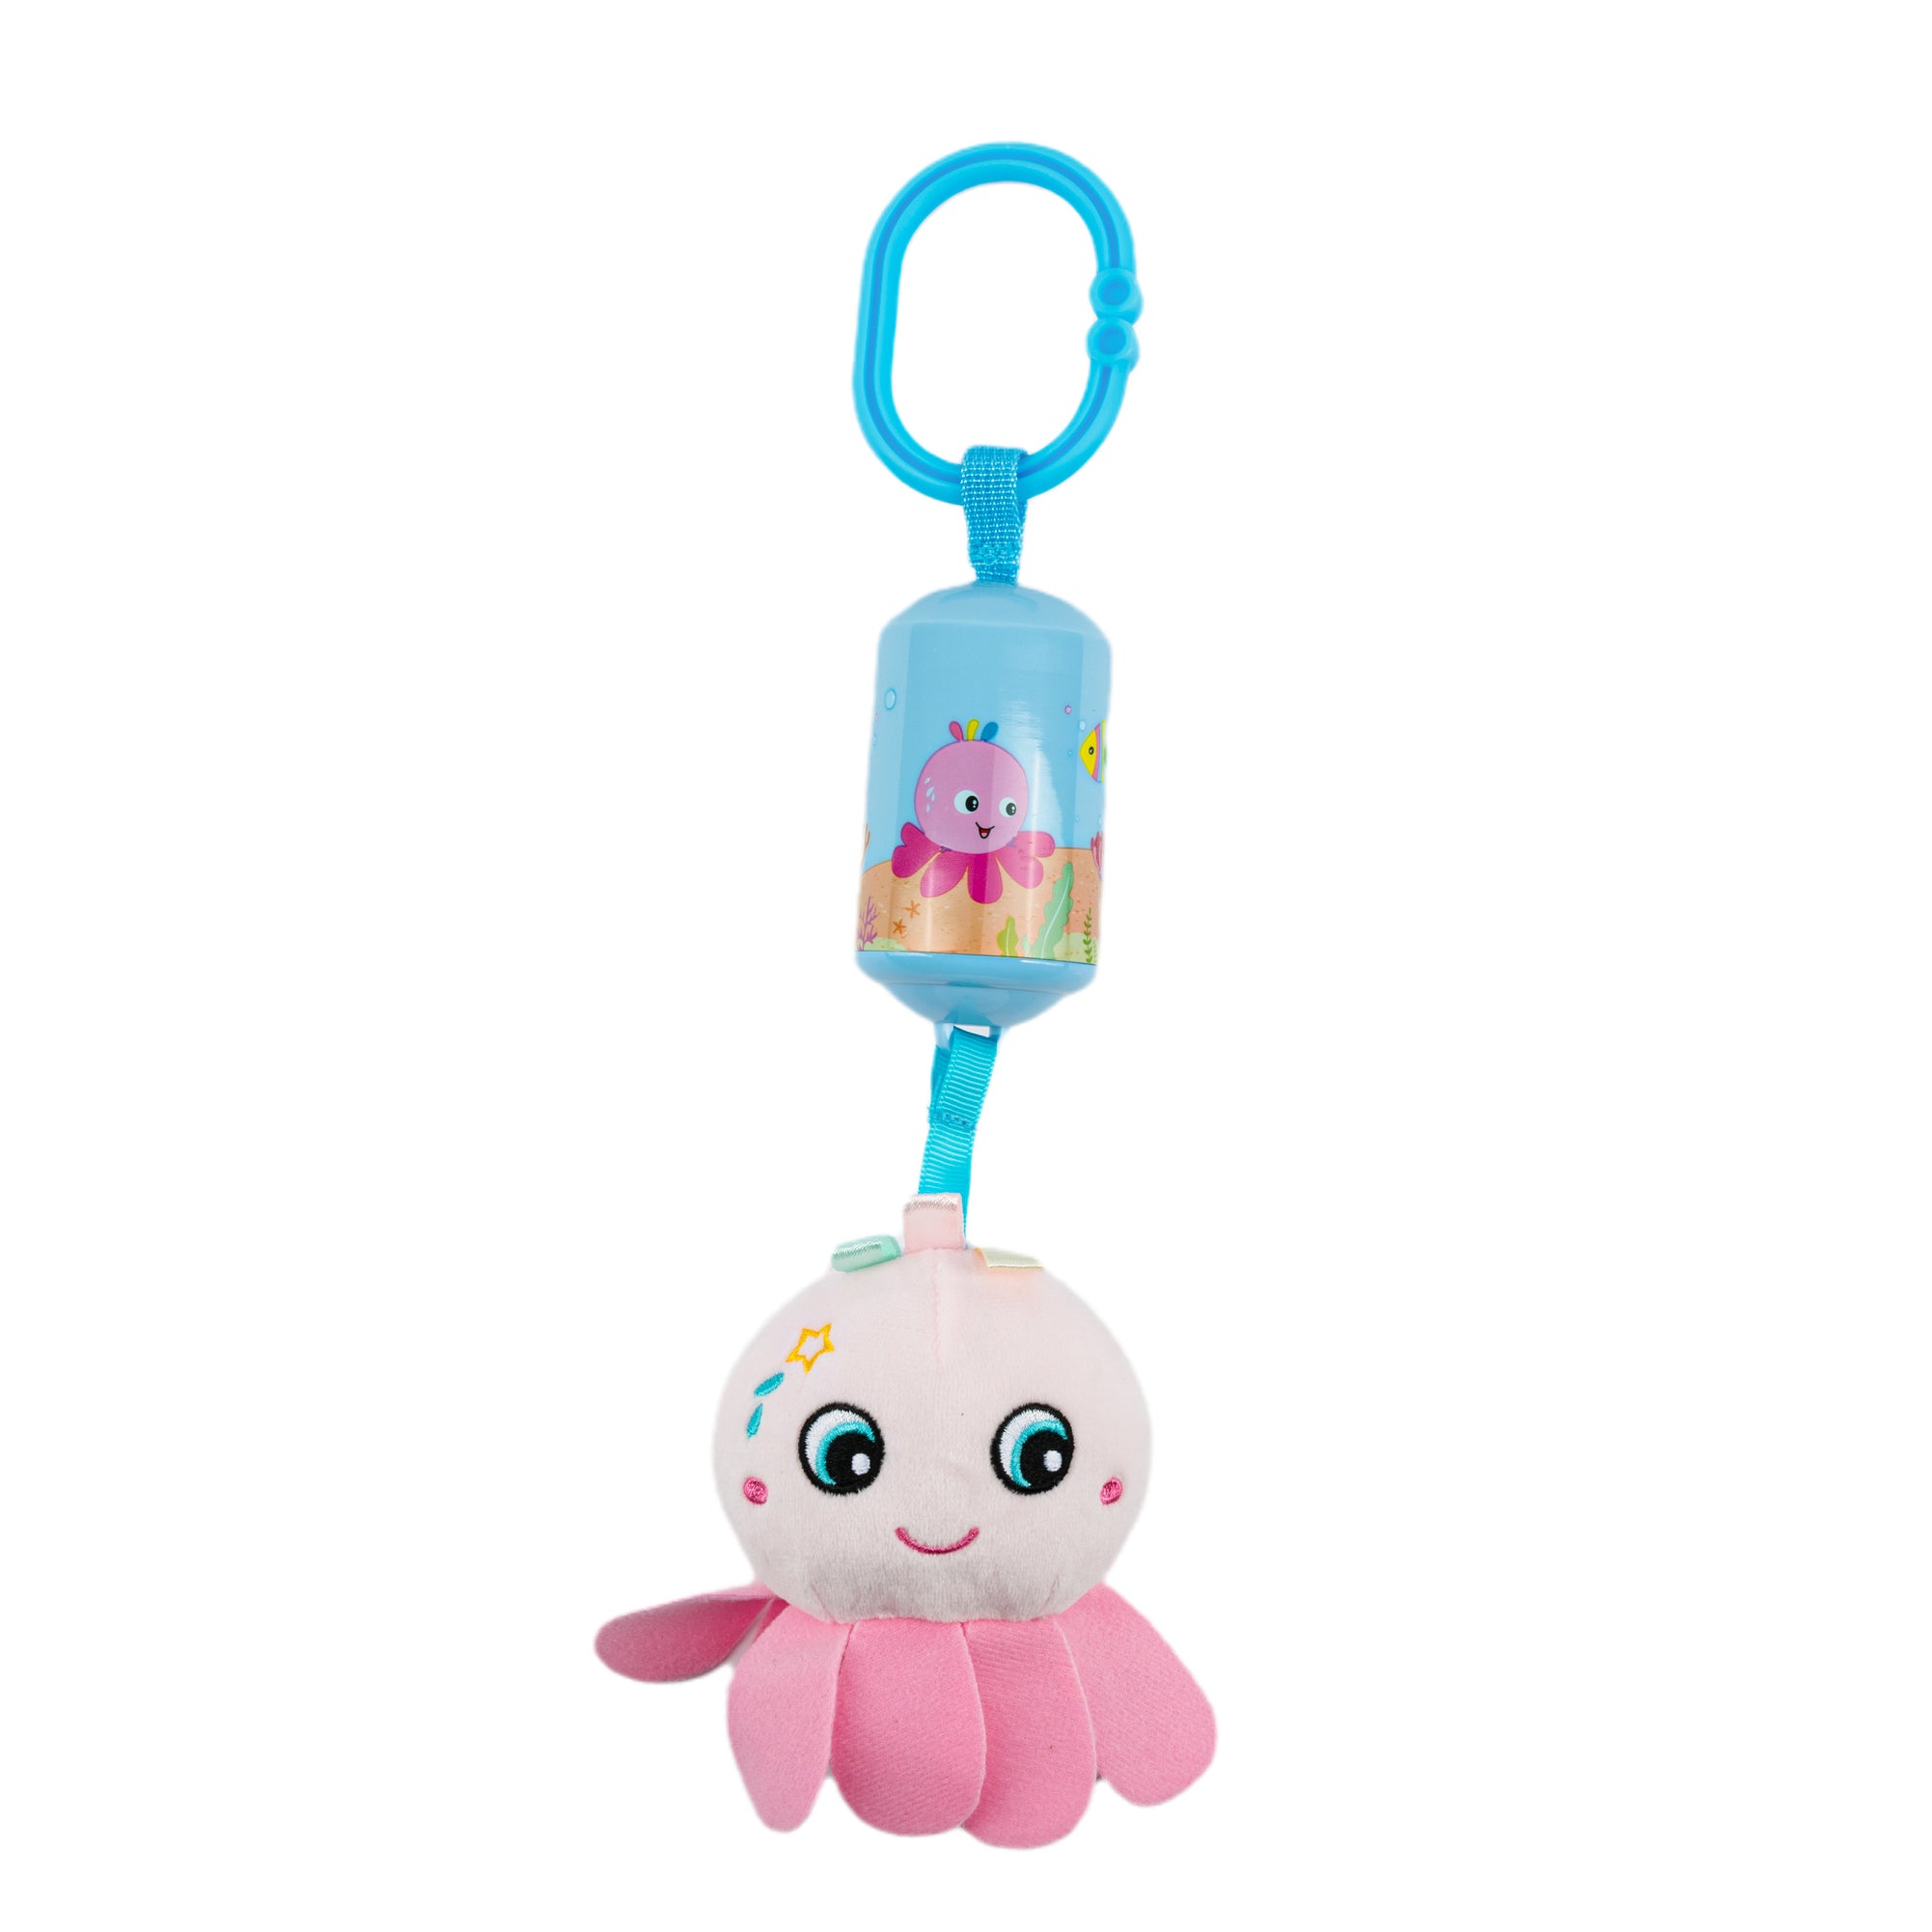 Soft Toy Jelly Fish